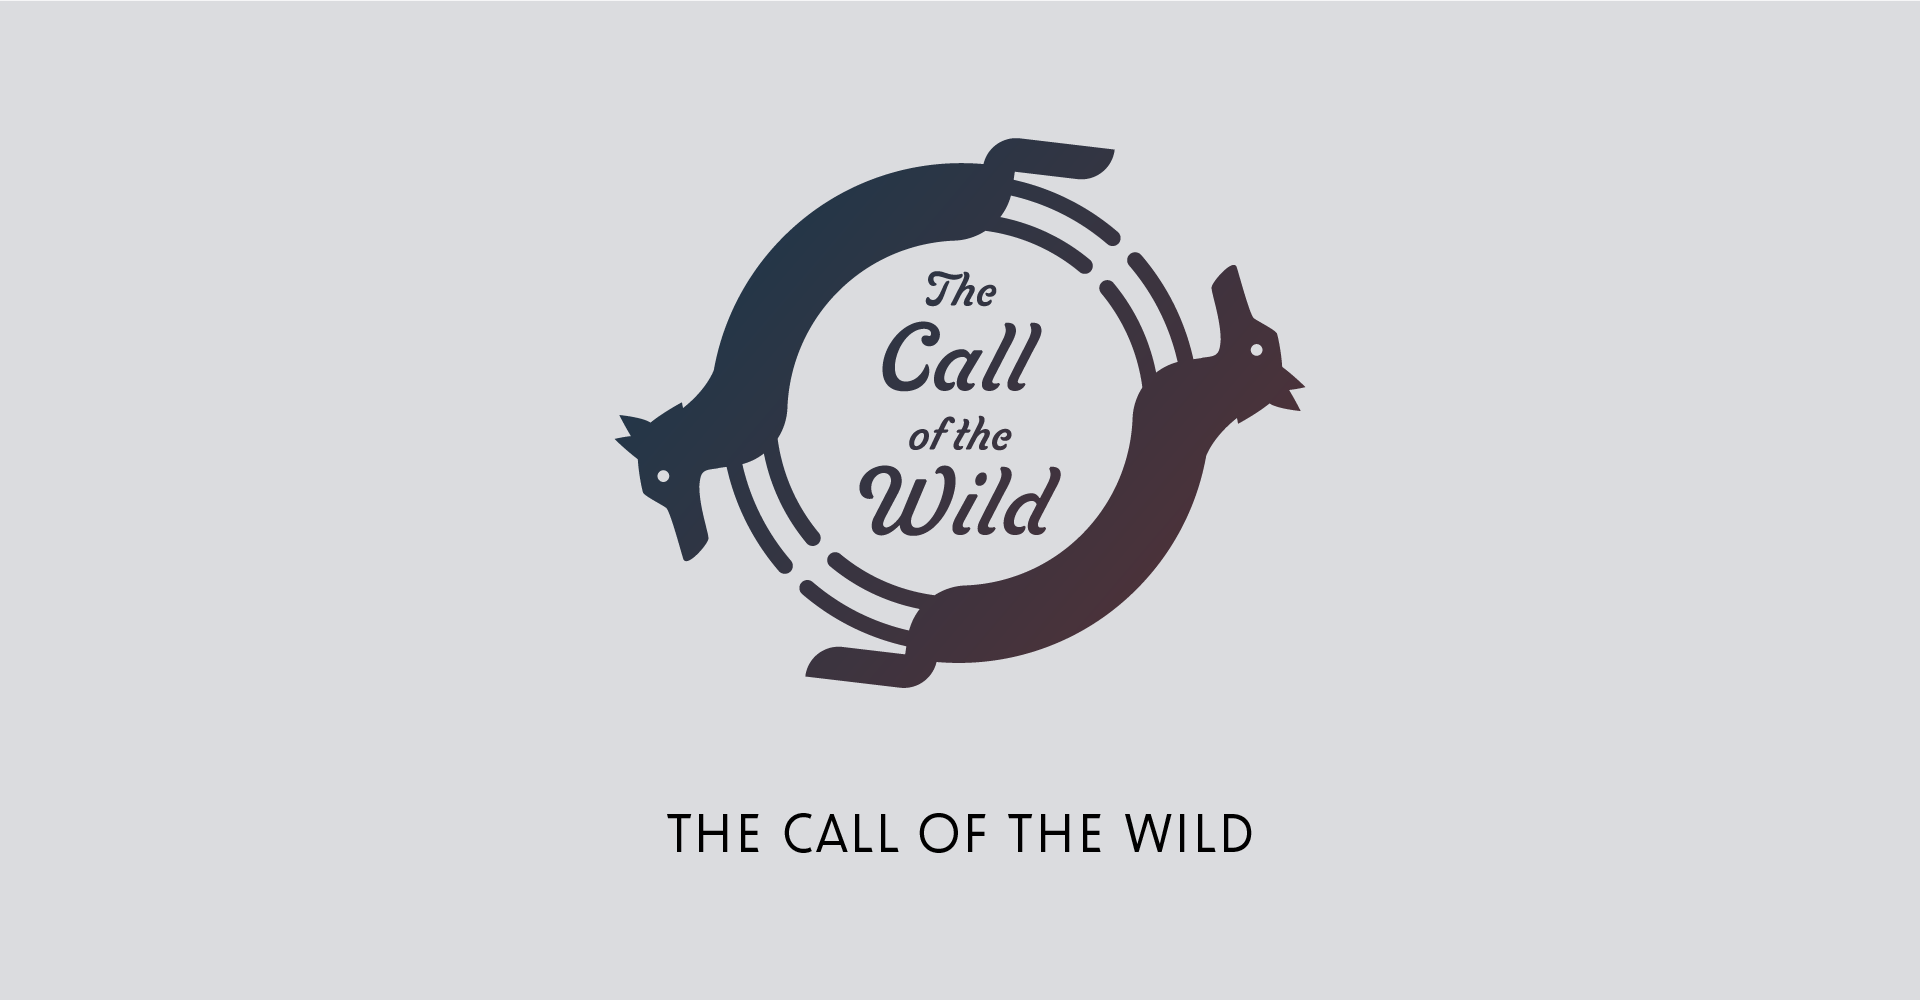 Logo for The Call of the Wild featuring two wolves arched as 2 halves of a circle with the name of the book in the center.